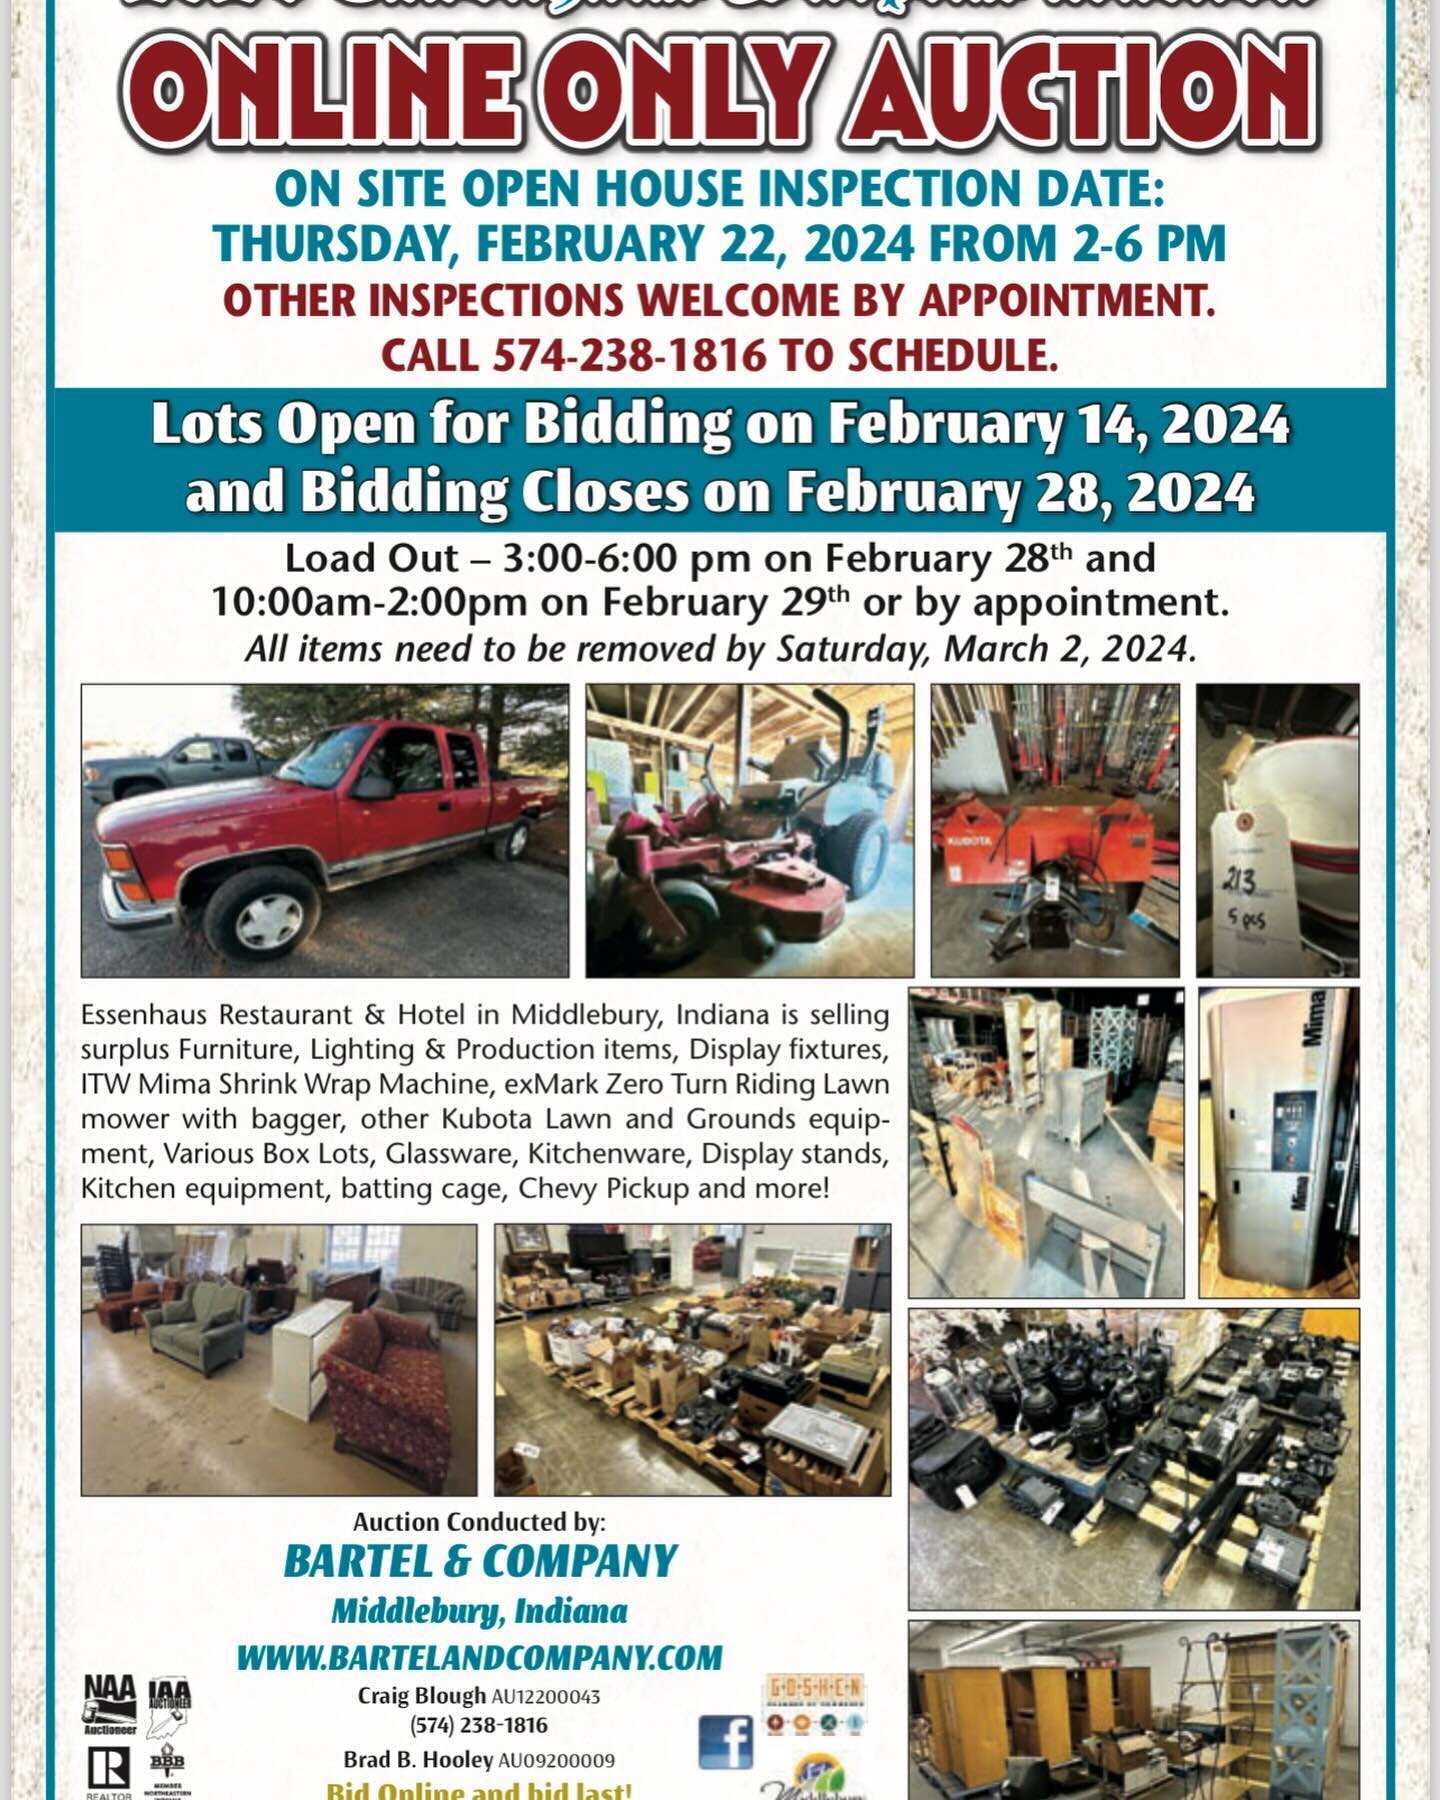 Bidding starts closing at 9:30 am EST February 28, 2024
Middlebury, IN
Das Dutchman Essenhaus surplus auction happening now - bid online - go to www.bartelandcompany.com for link or for  more info contact Bartel and Company Auctions, Craig Blough, Au